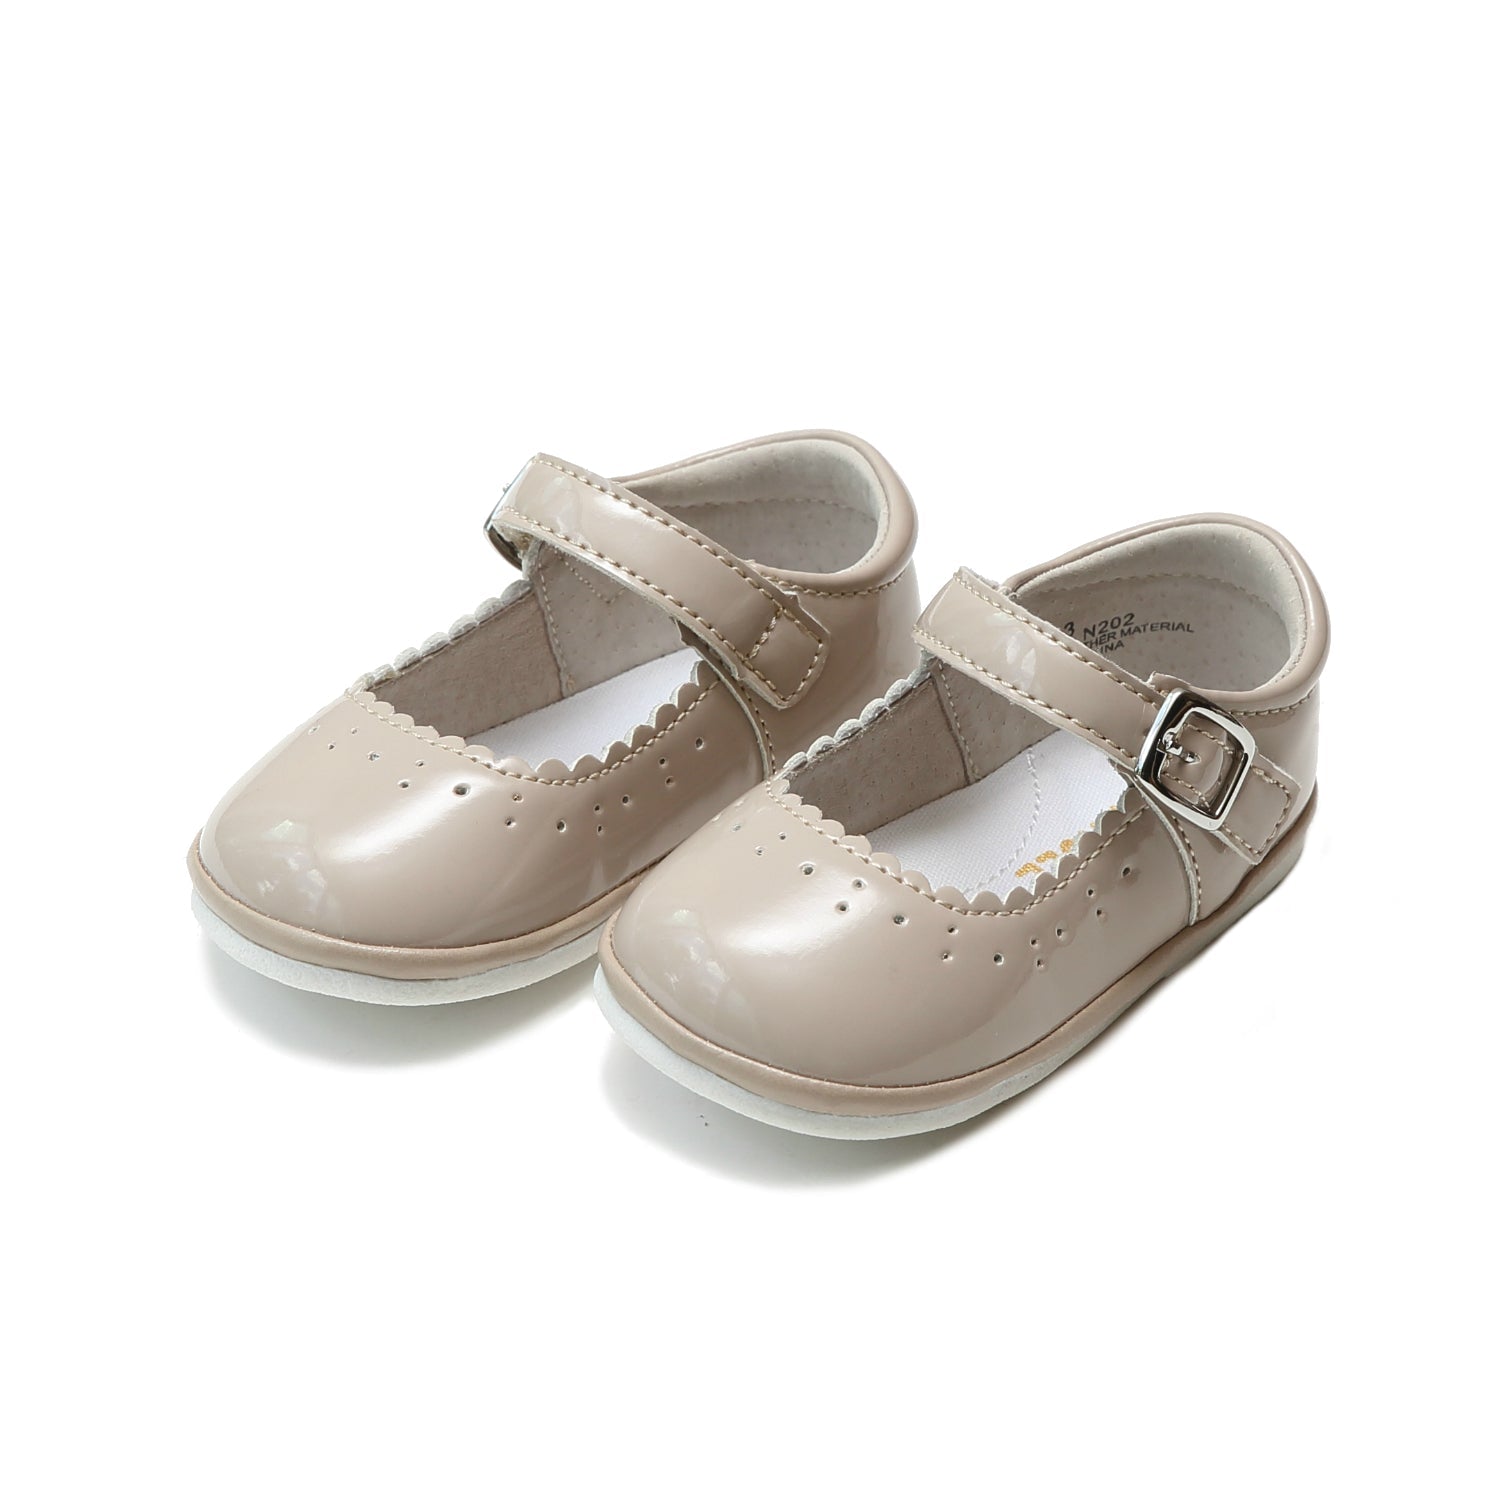 Scarlett Scalloped Mary Jane - Babies & Toddlers